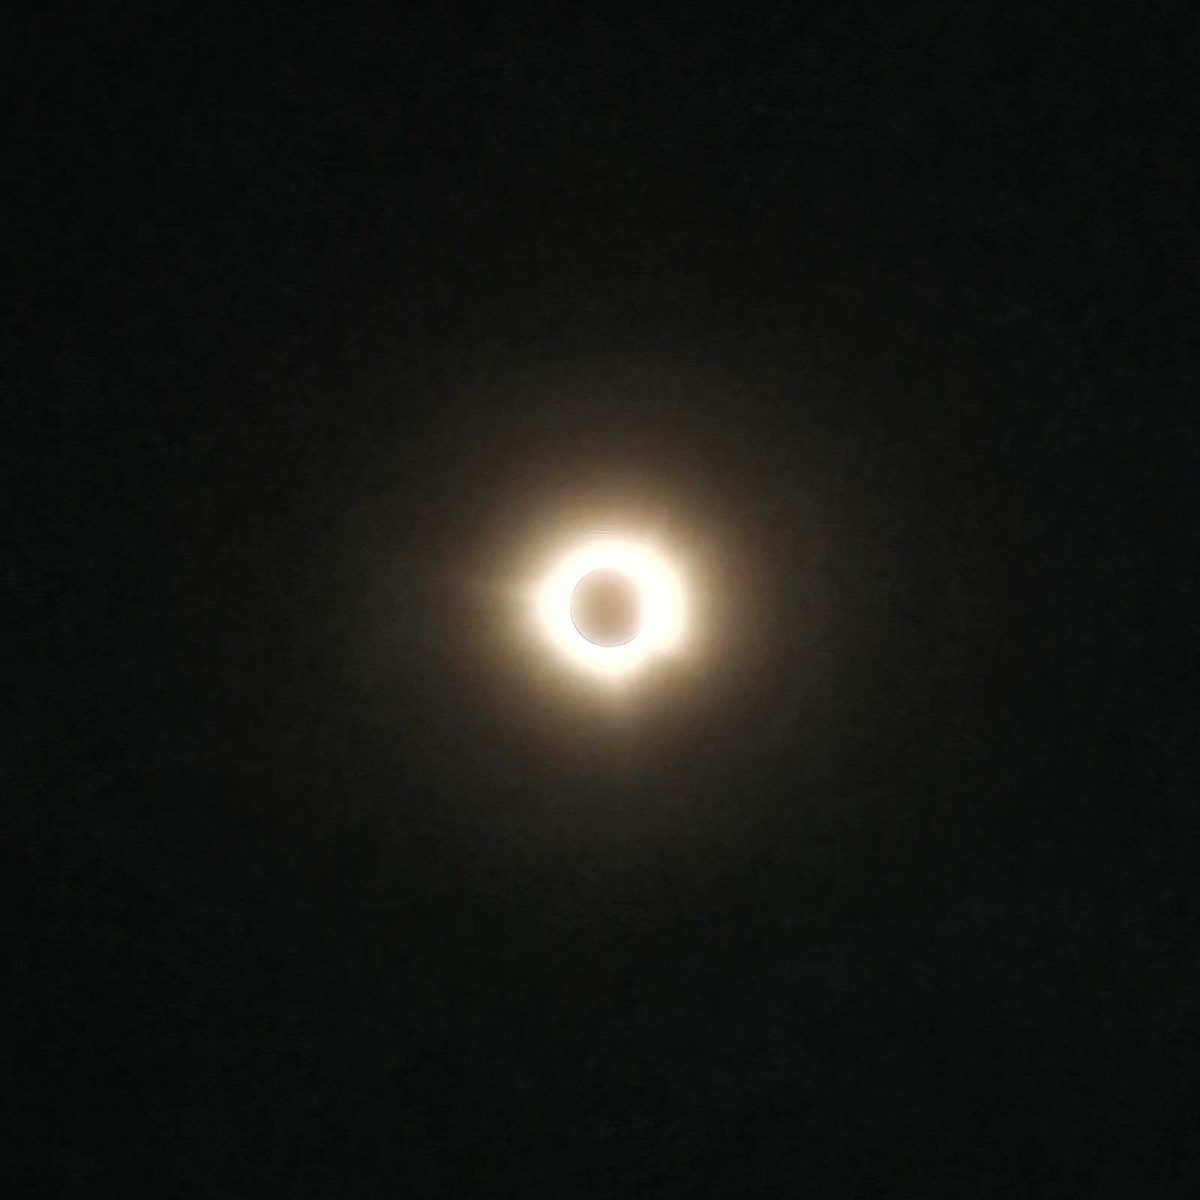 The Solar Eclipse at 1:50 p.m. in Clarkson, AR